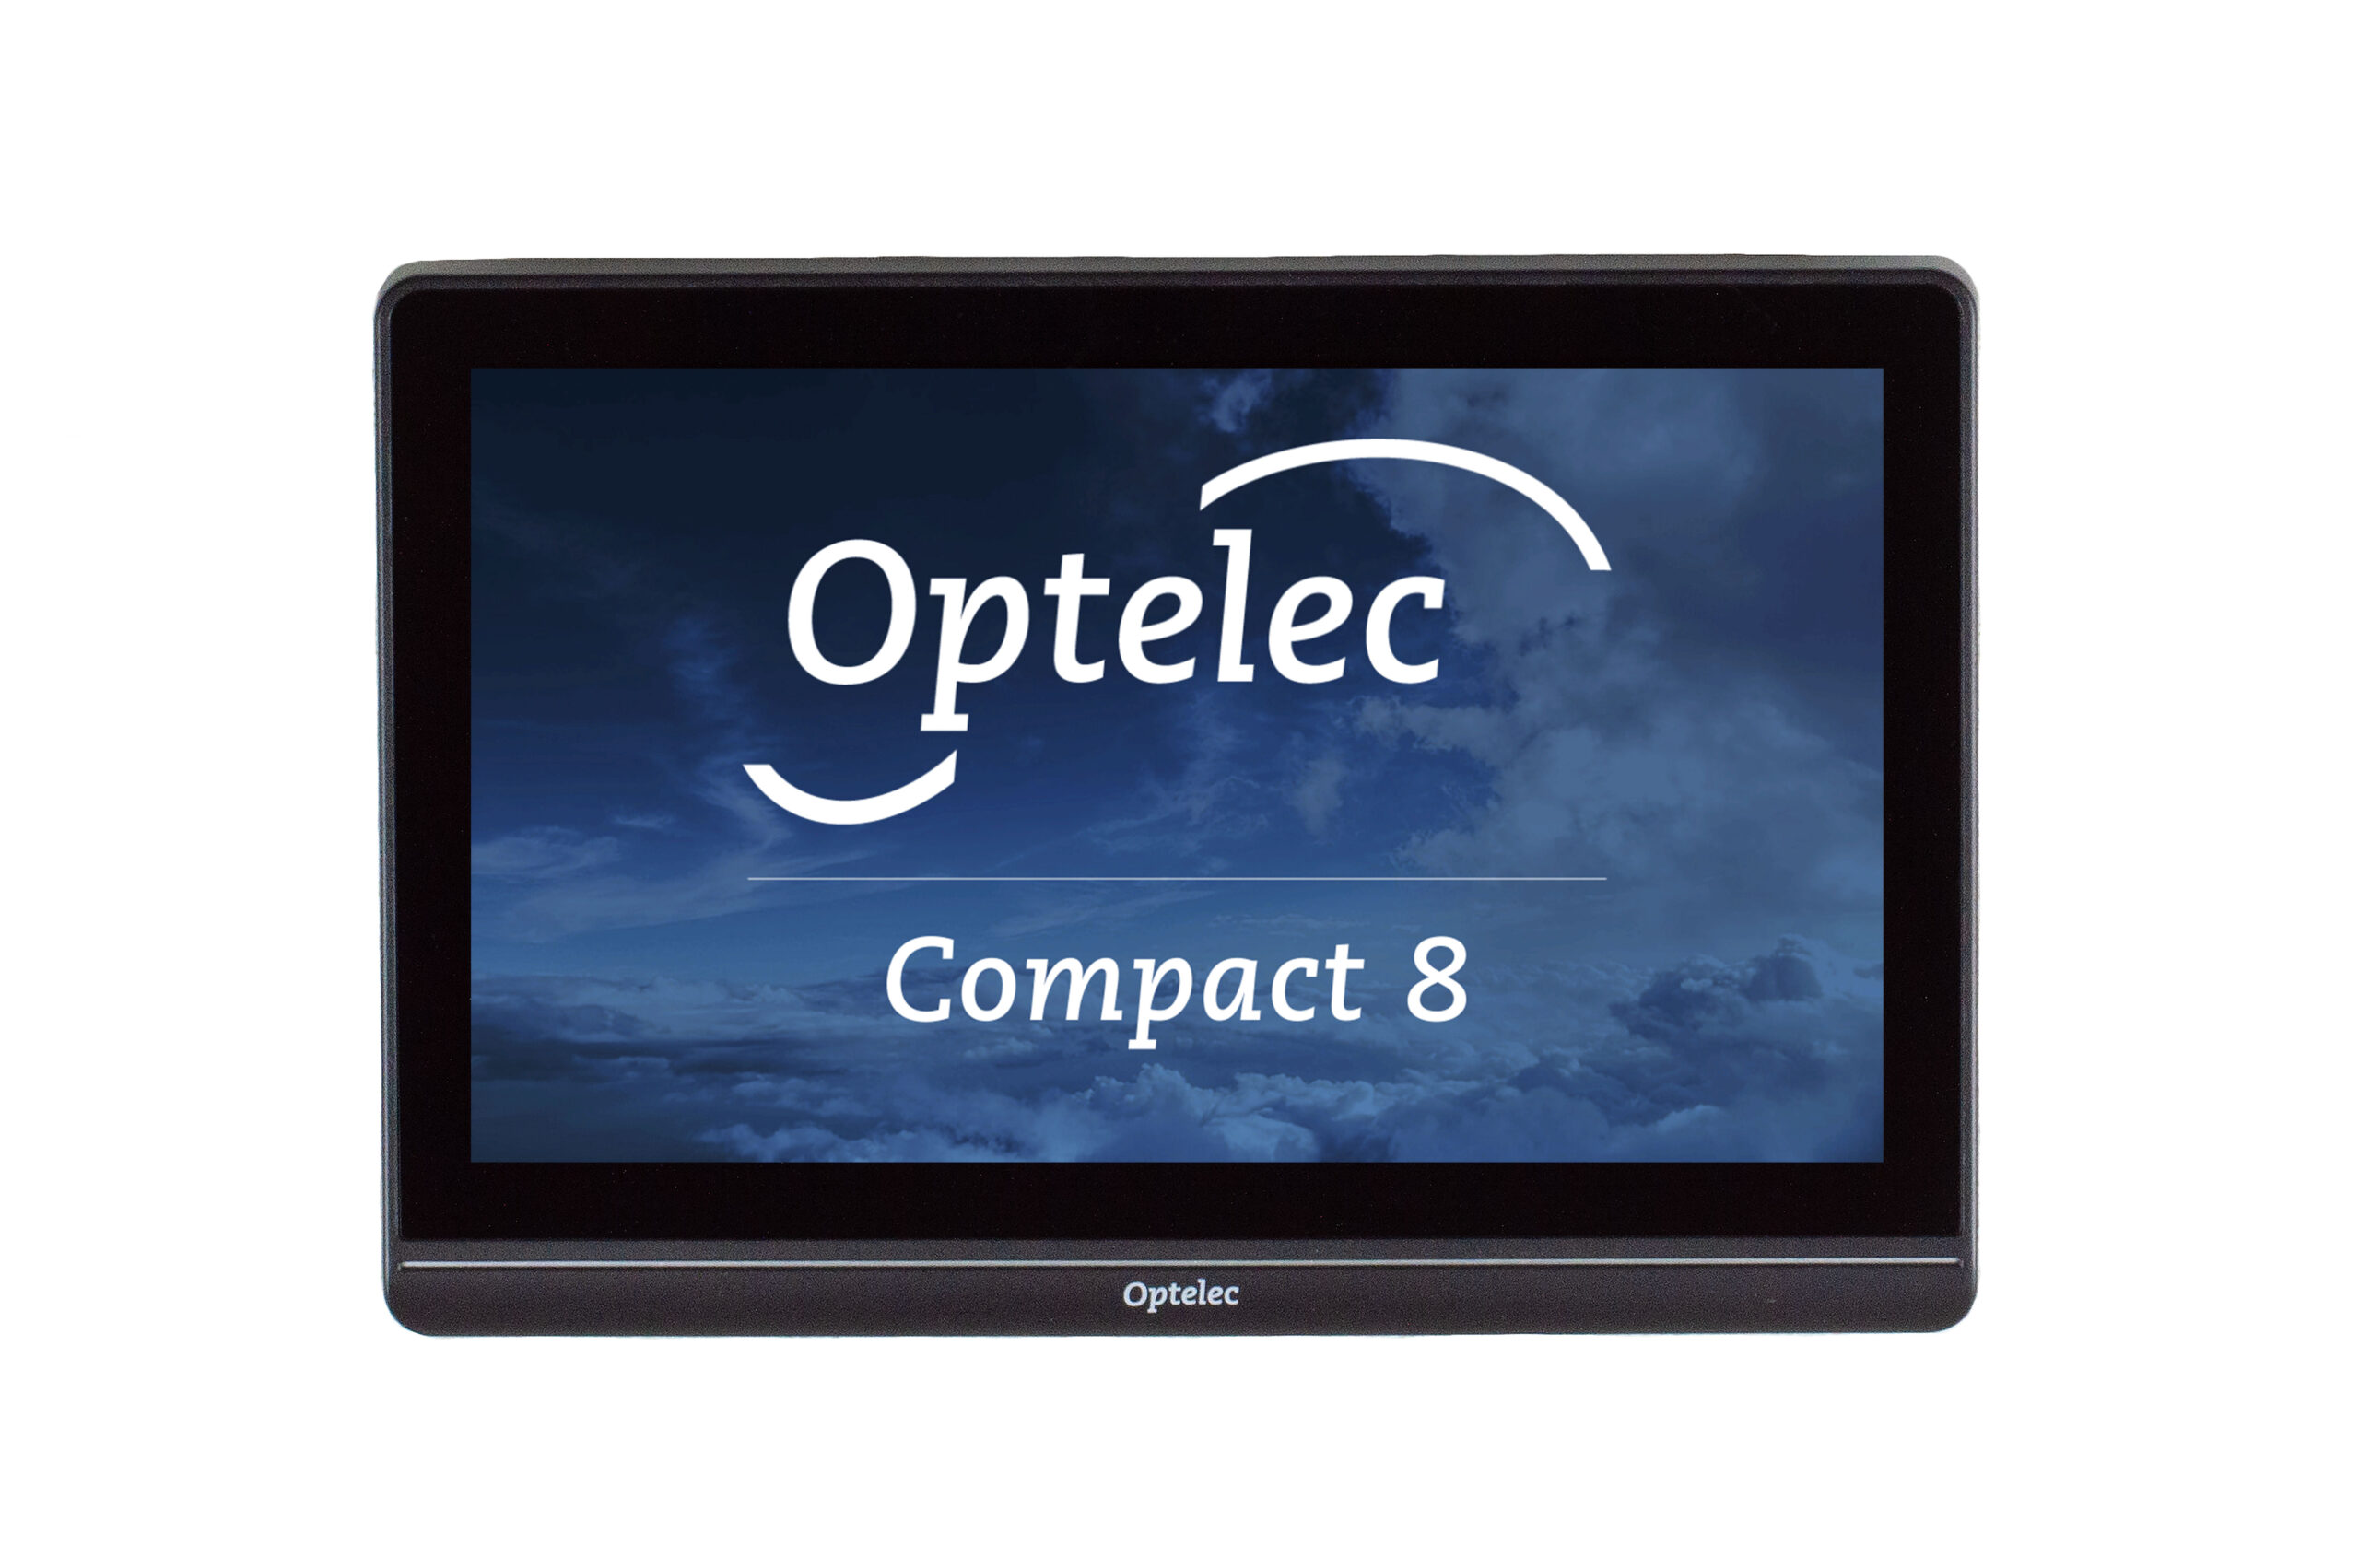 Image of the front screen of the compact 8 video magnifier with the optelec logo